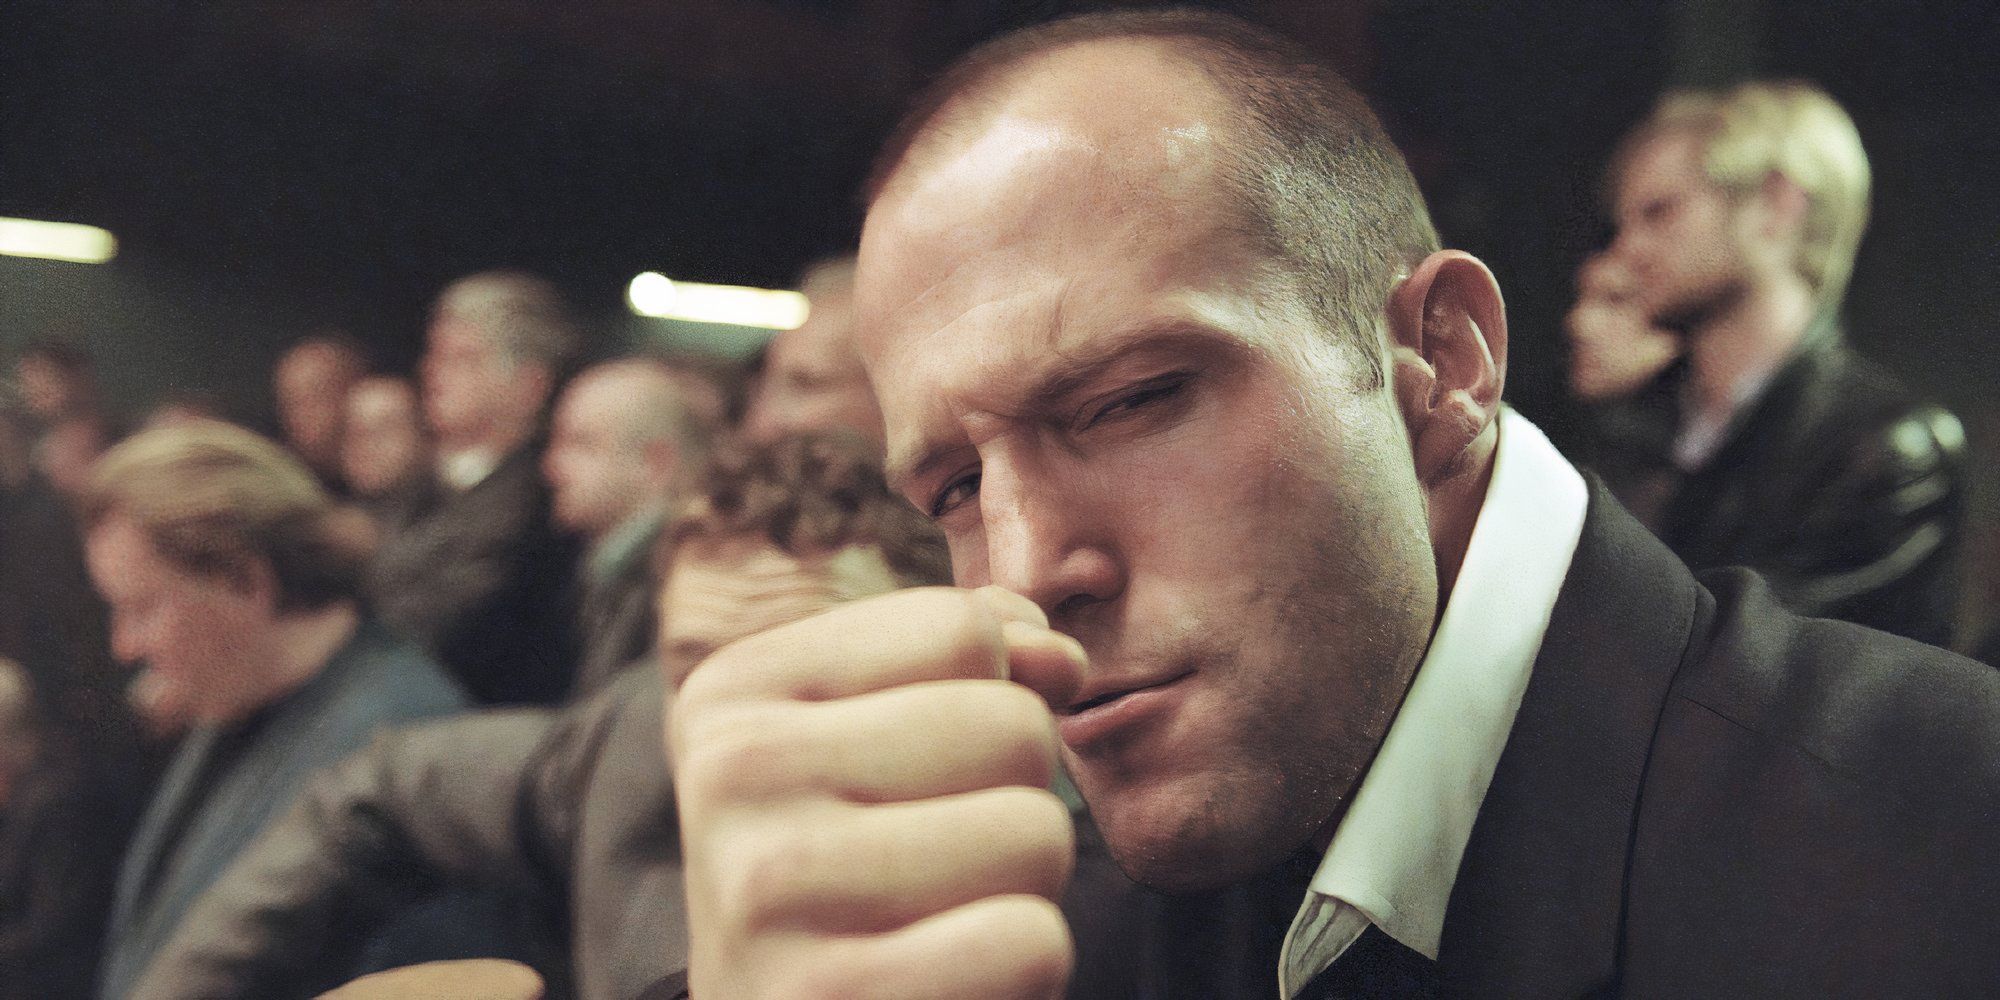 Jason Statham as Turkish in Snatch giving a fist bump while looking at the camera.